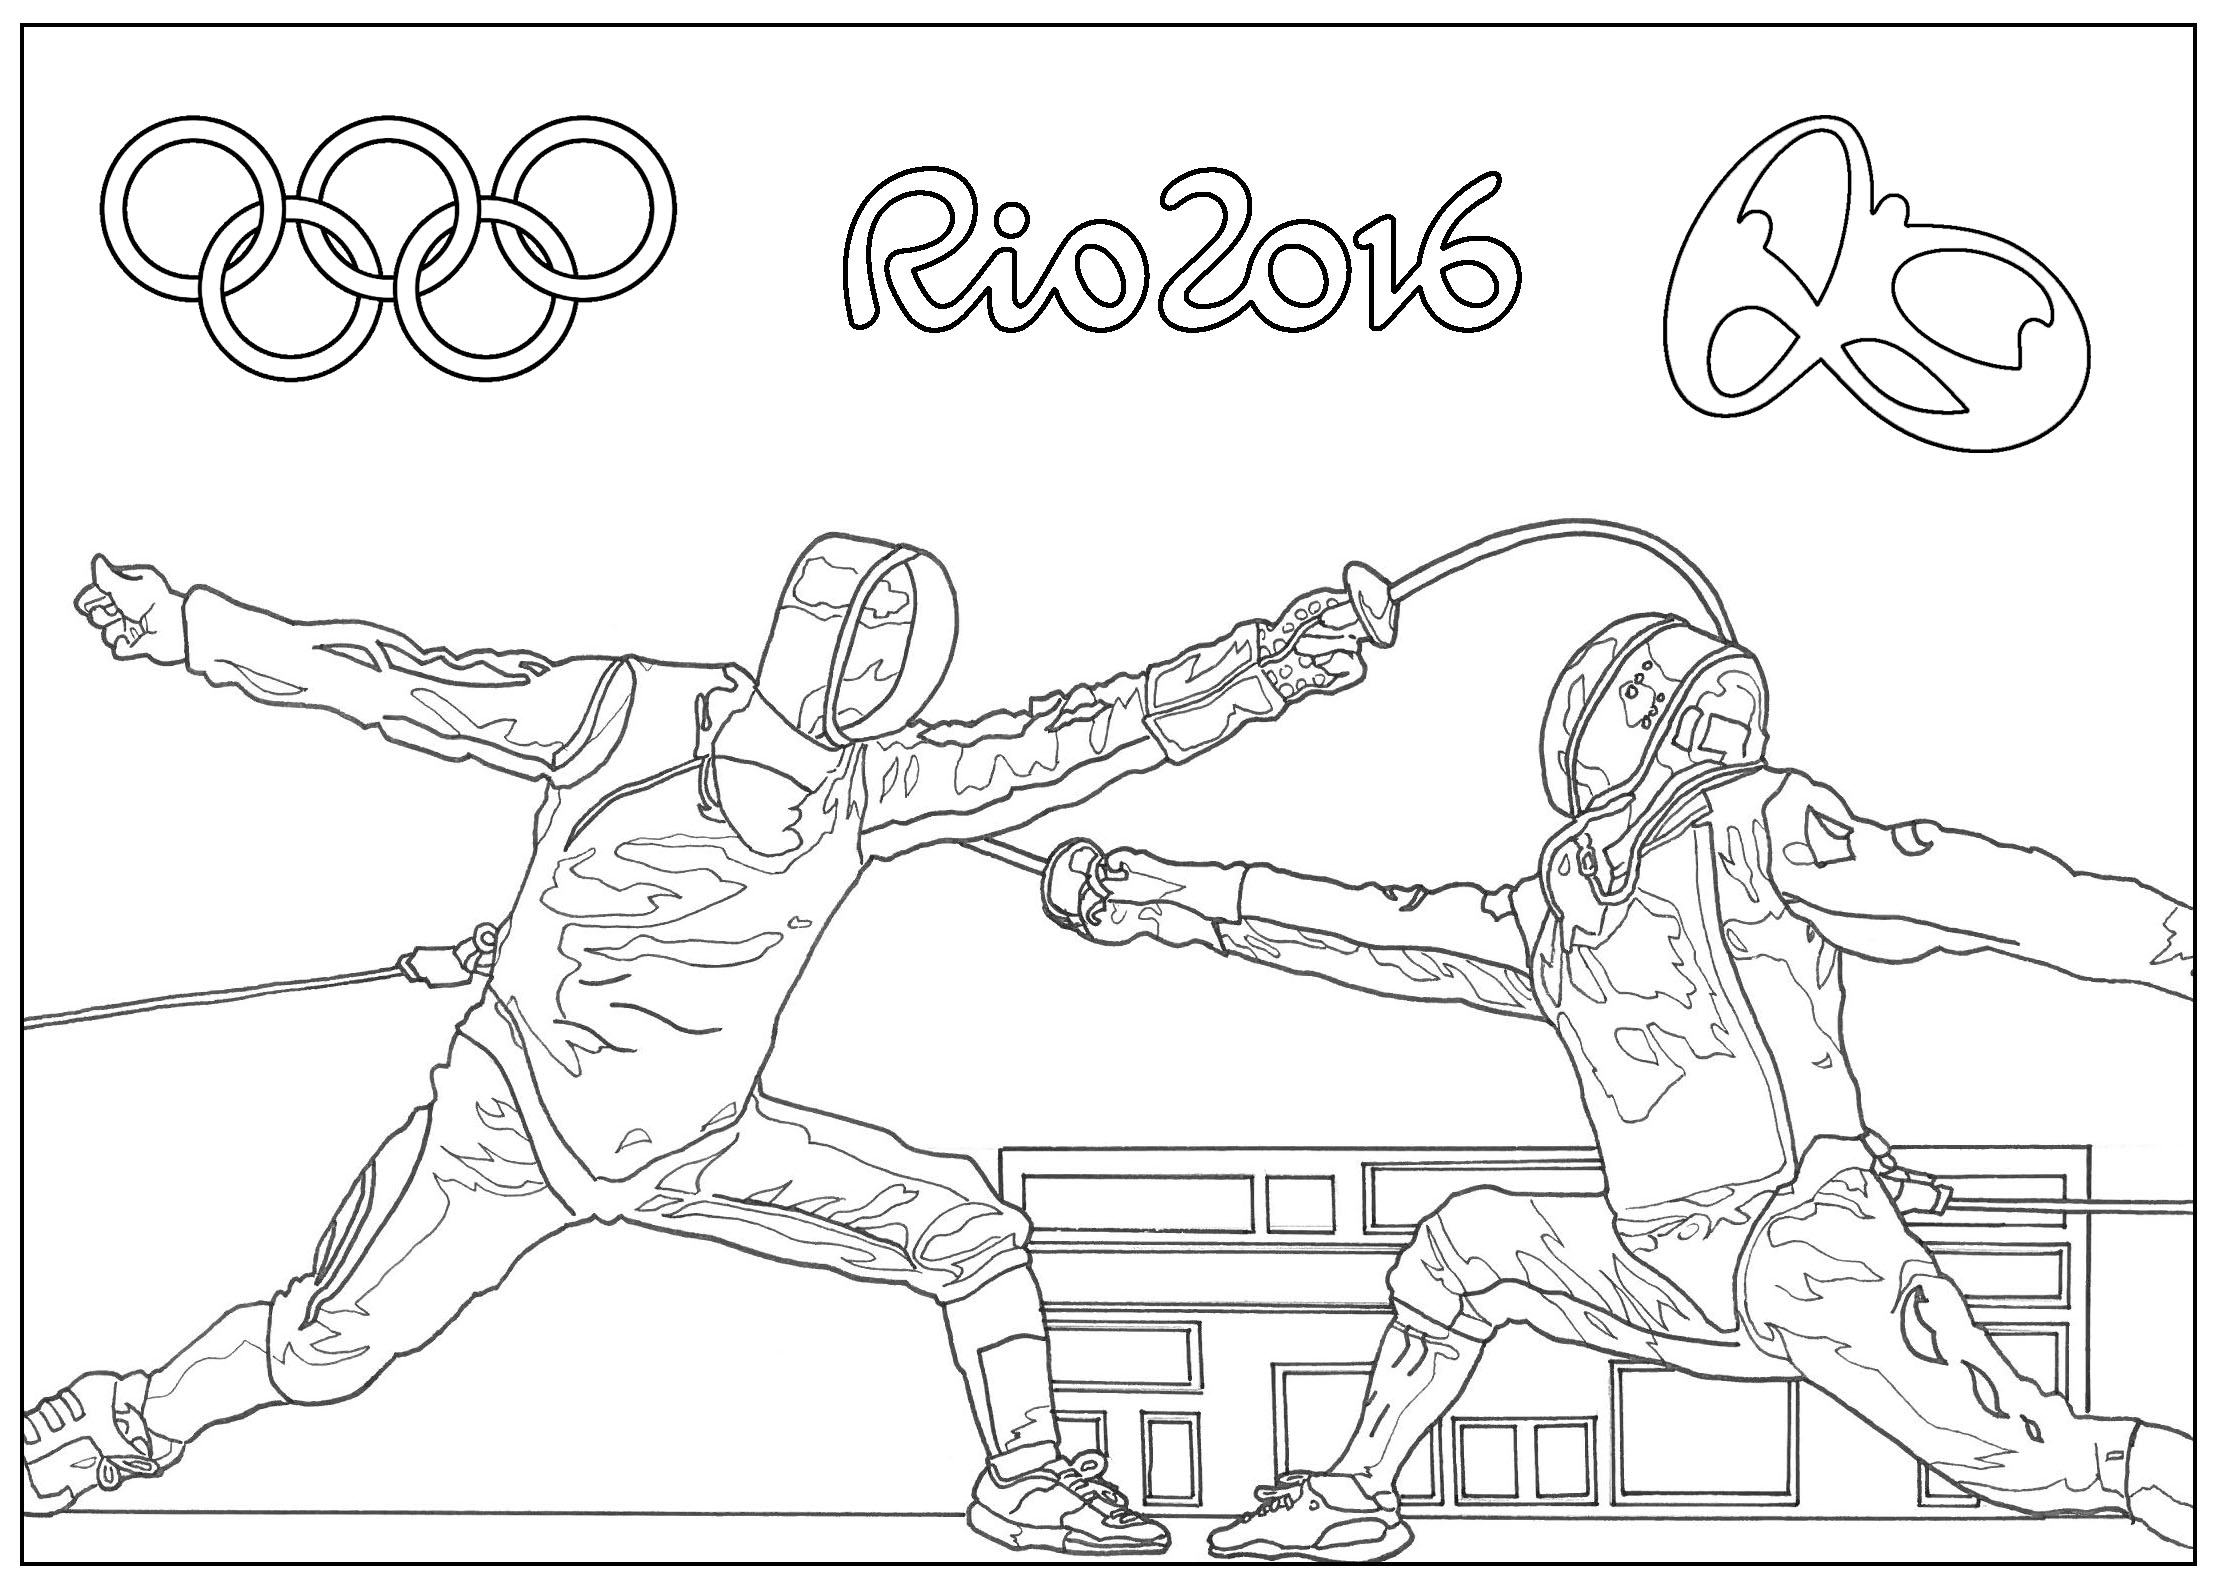 Olympic Games coloring page to download for free